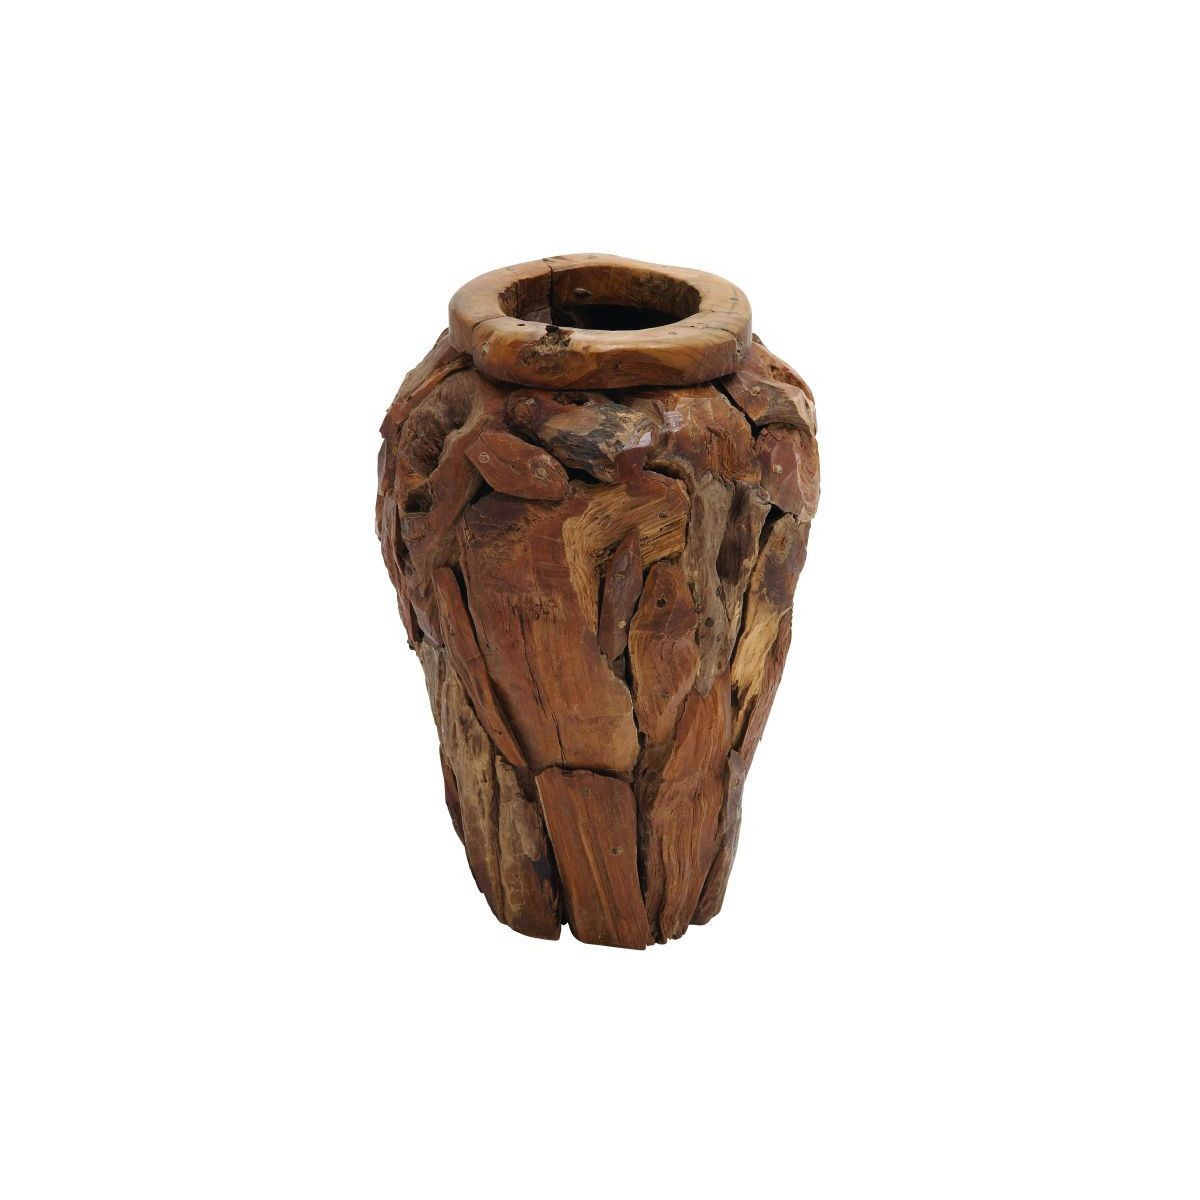 14 Unique Birch Wood Vase 2024 free download birch wood vase of small wood vases compare prices at nextag intended for studio 350 teak wood 14 inches wide x 20 inches high vase